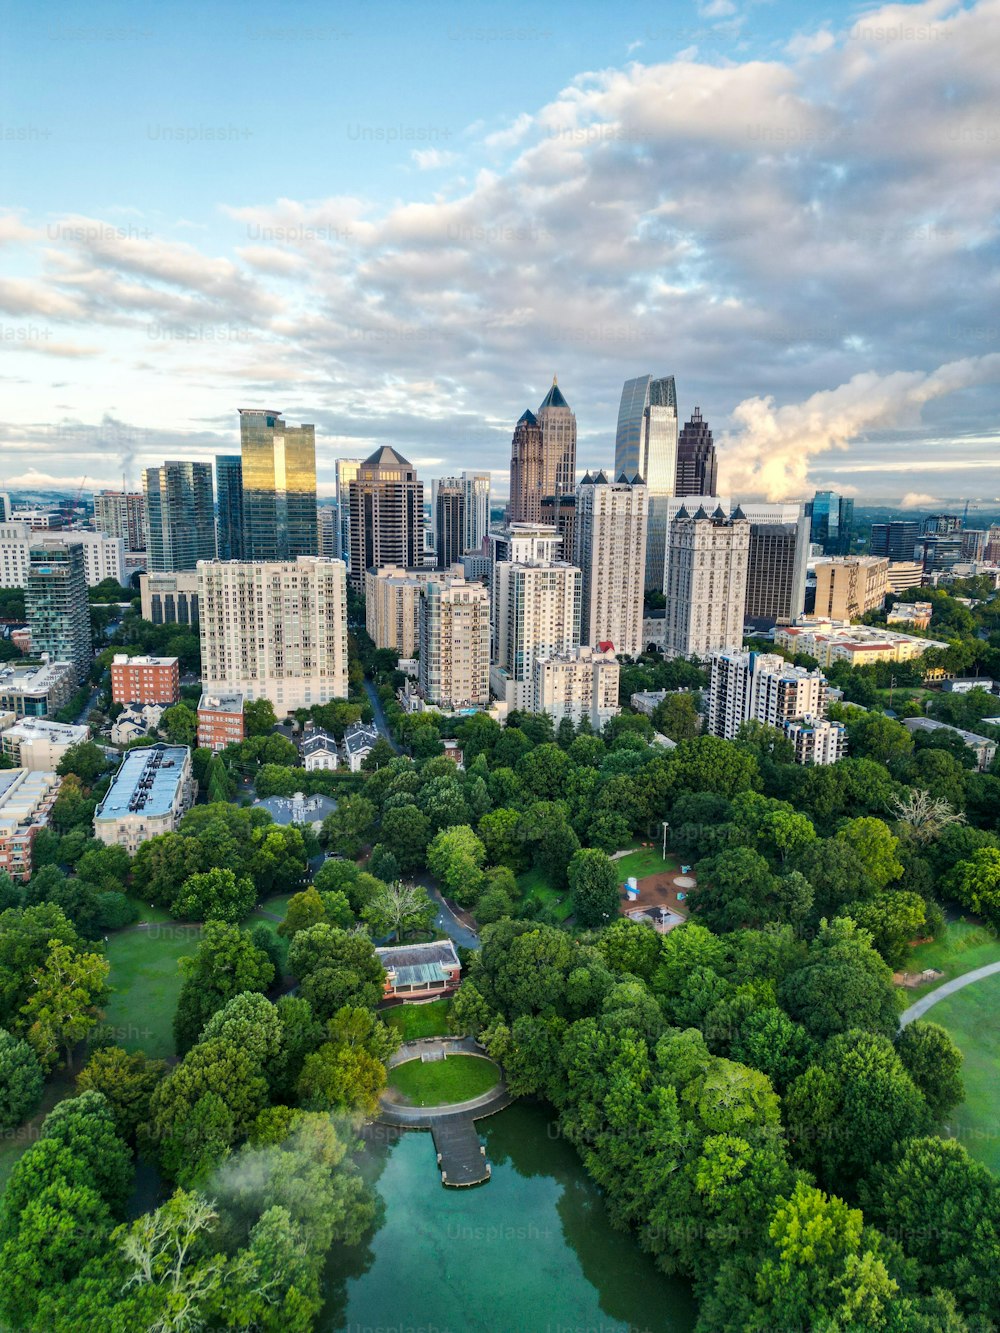 A vertical drone view of the Downtown Atlanta with modern buildings and a large green park, Georgia